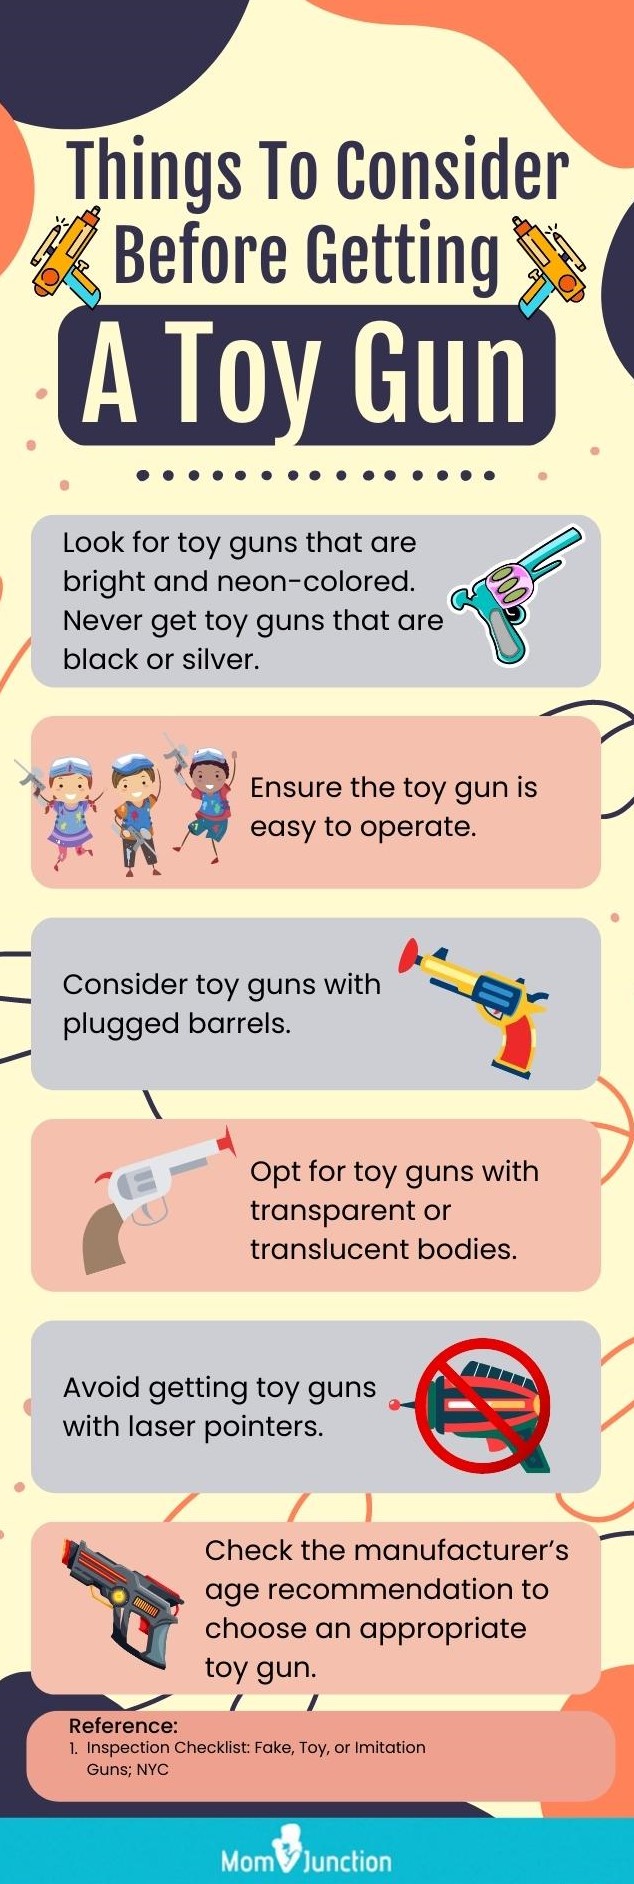 Things to consider before getting a toy gun